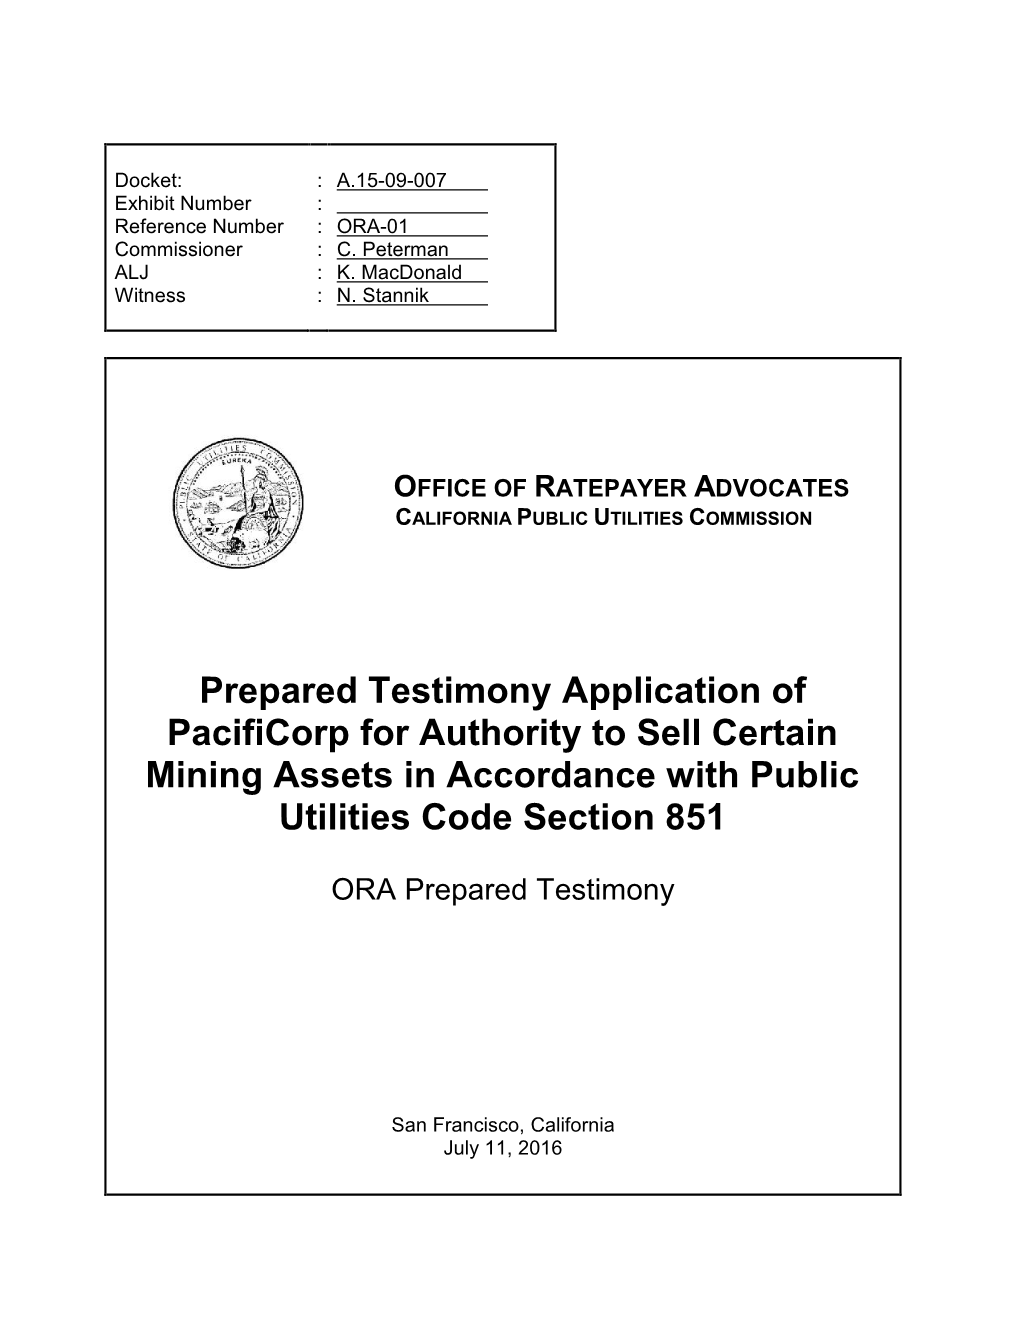 Prepared Testimony Application of Pacificorp for Authority to Sell Certain Mining Assets in Accordance with Public Utilities Code Section 851